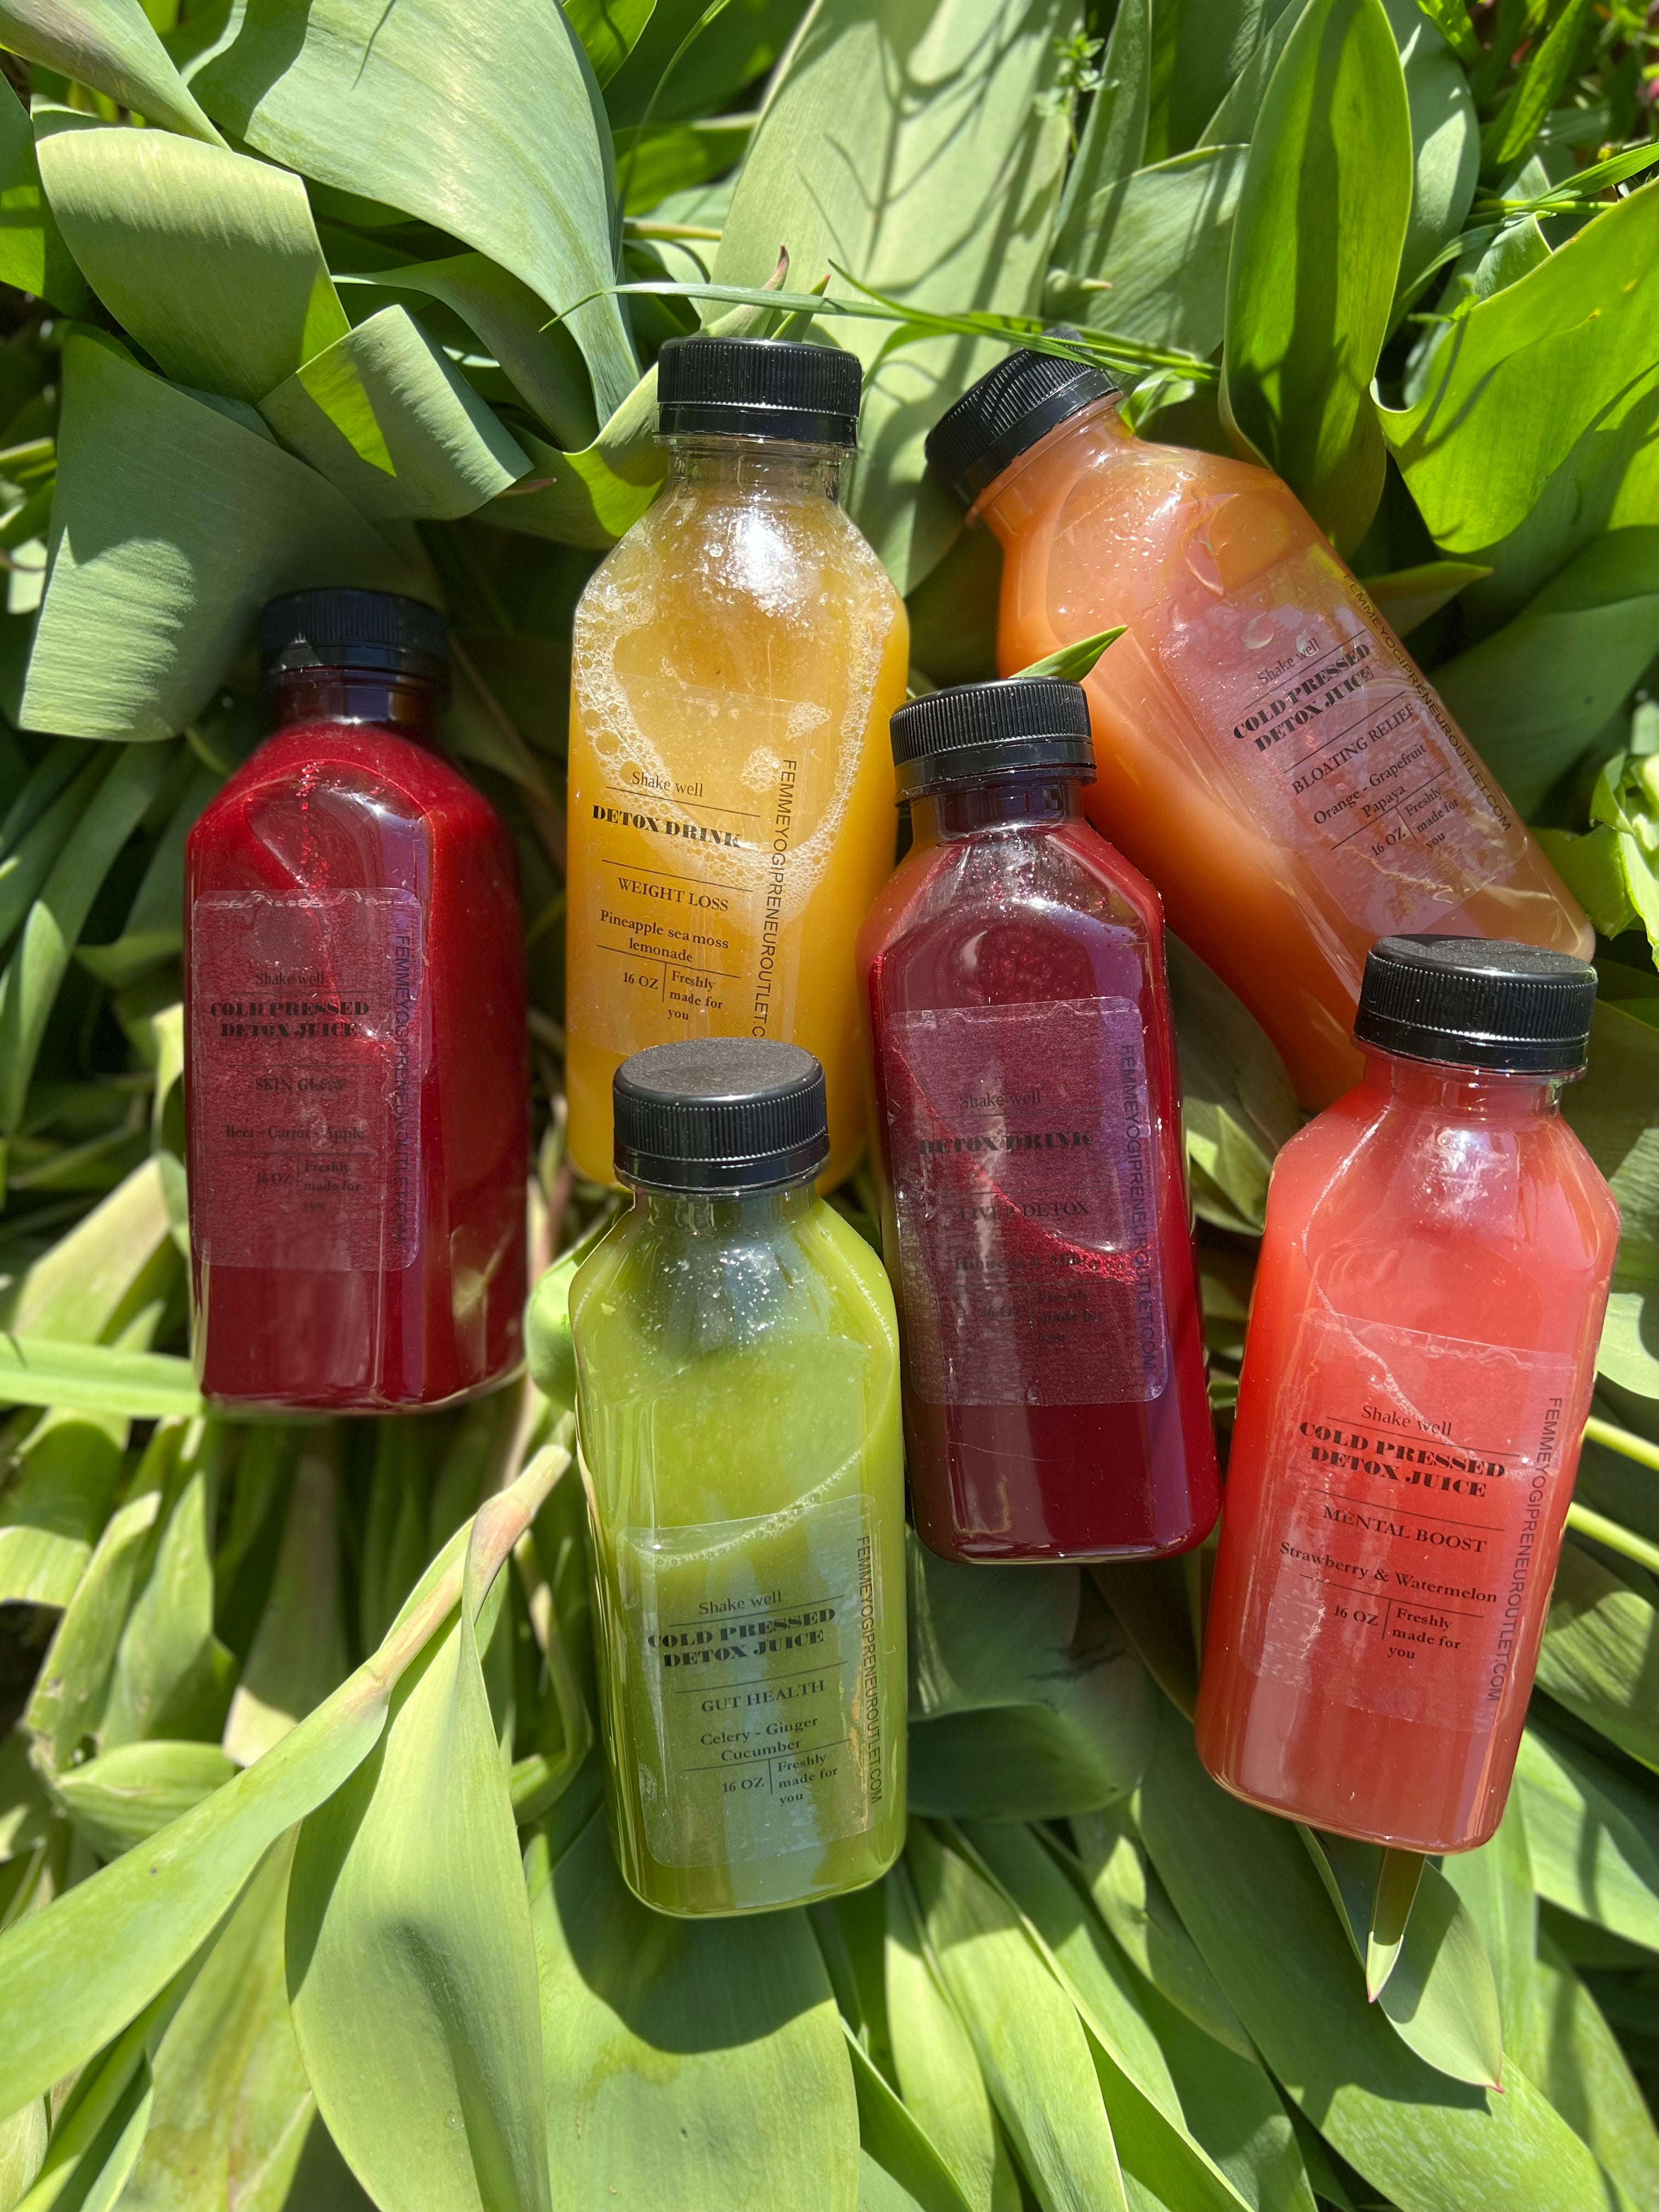 Cold pressed fruit juices for detox - 3 day detox cleanse